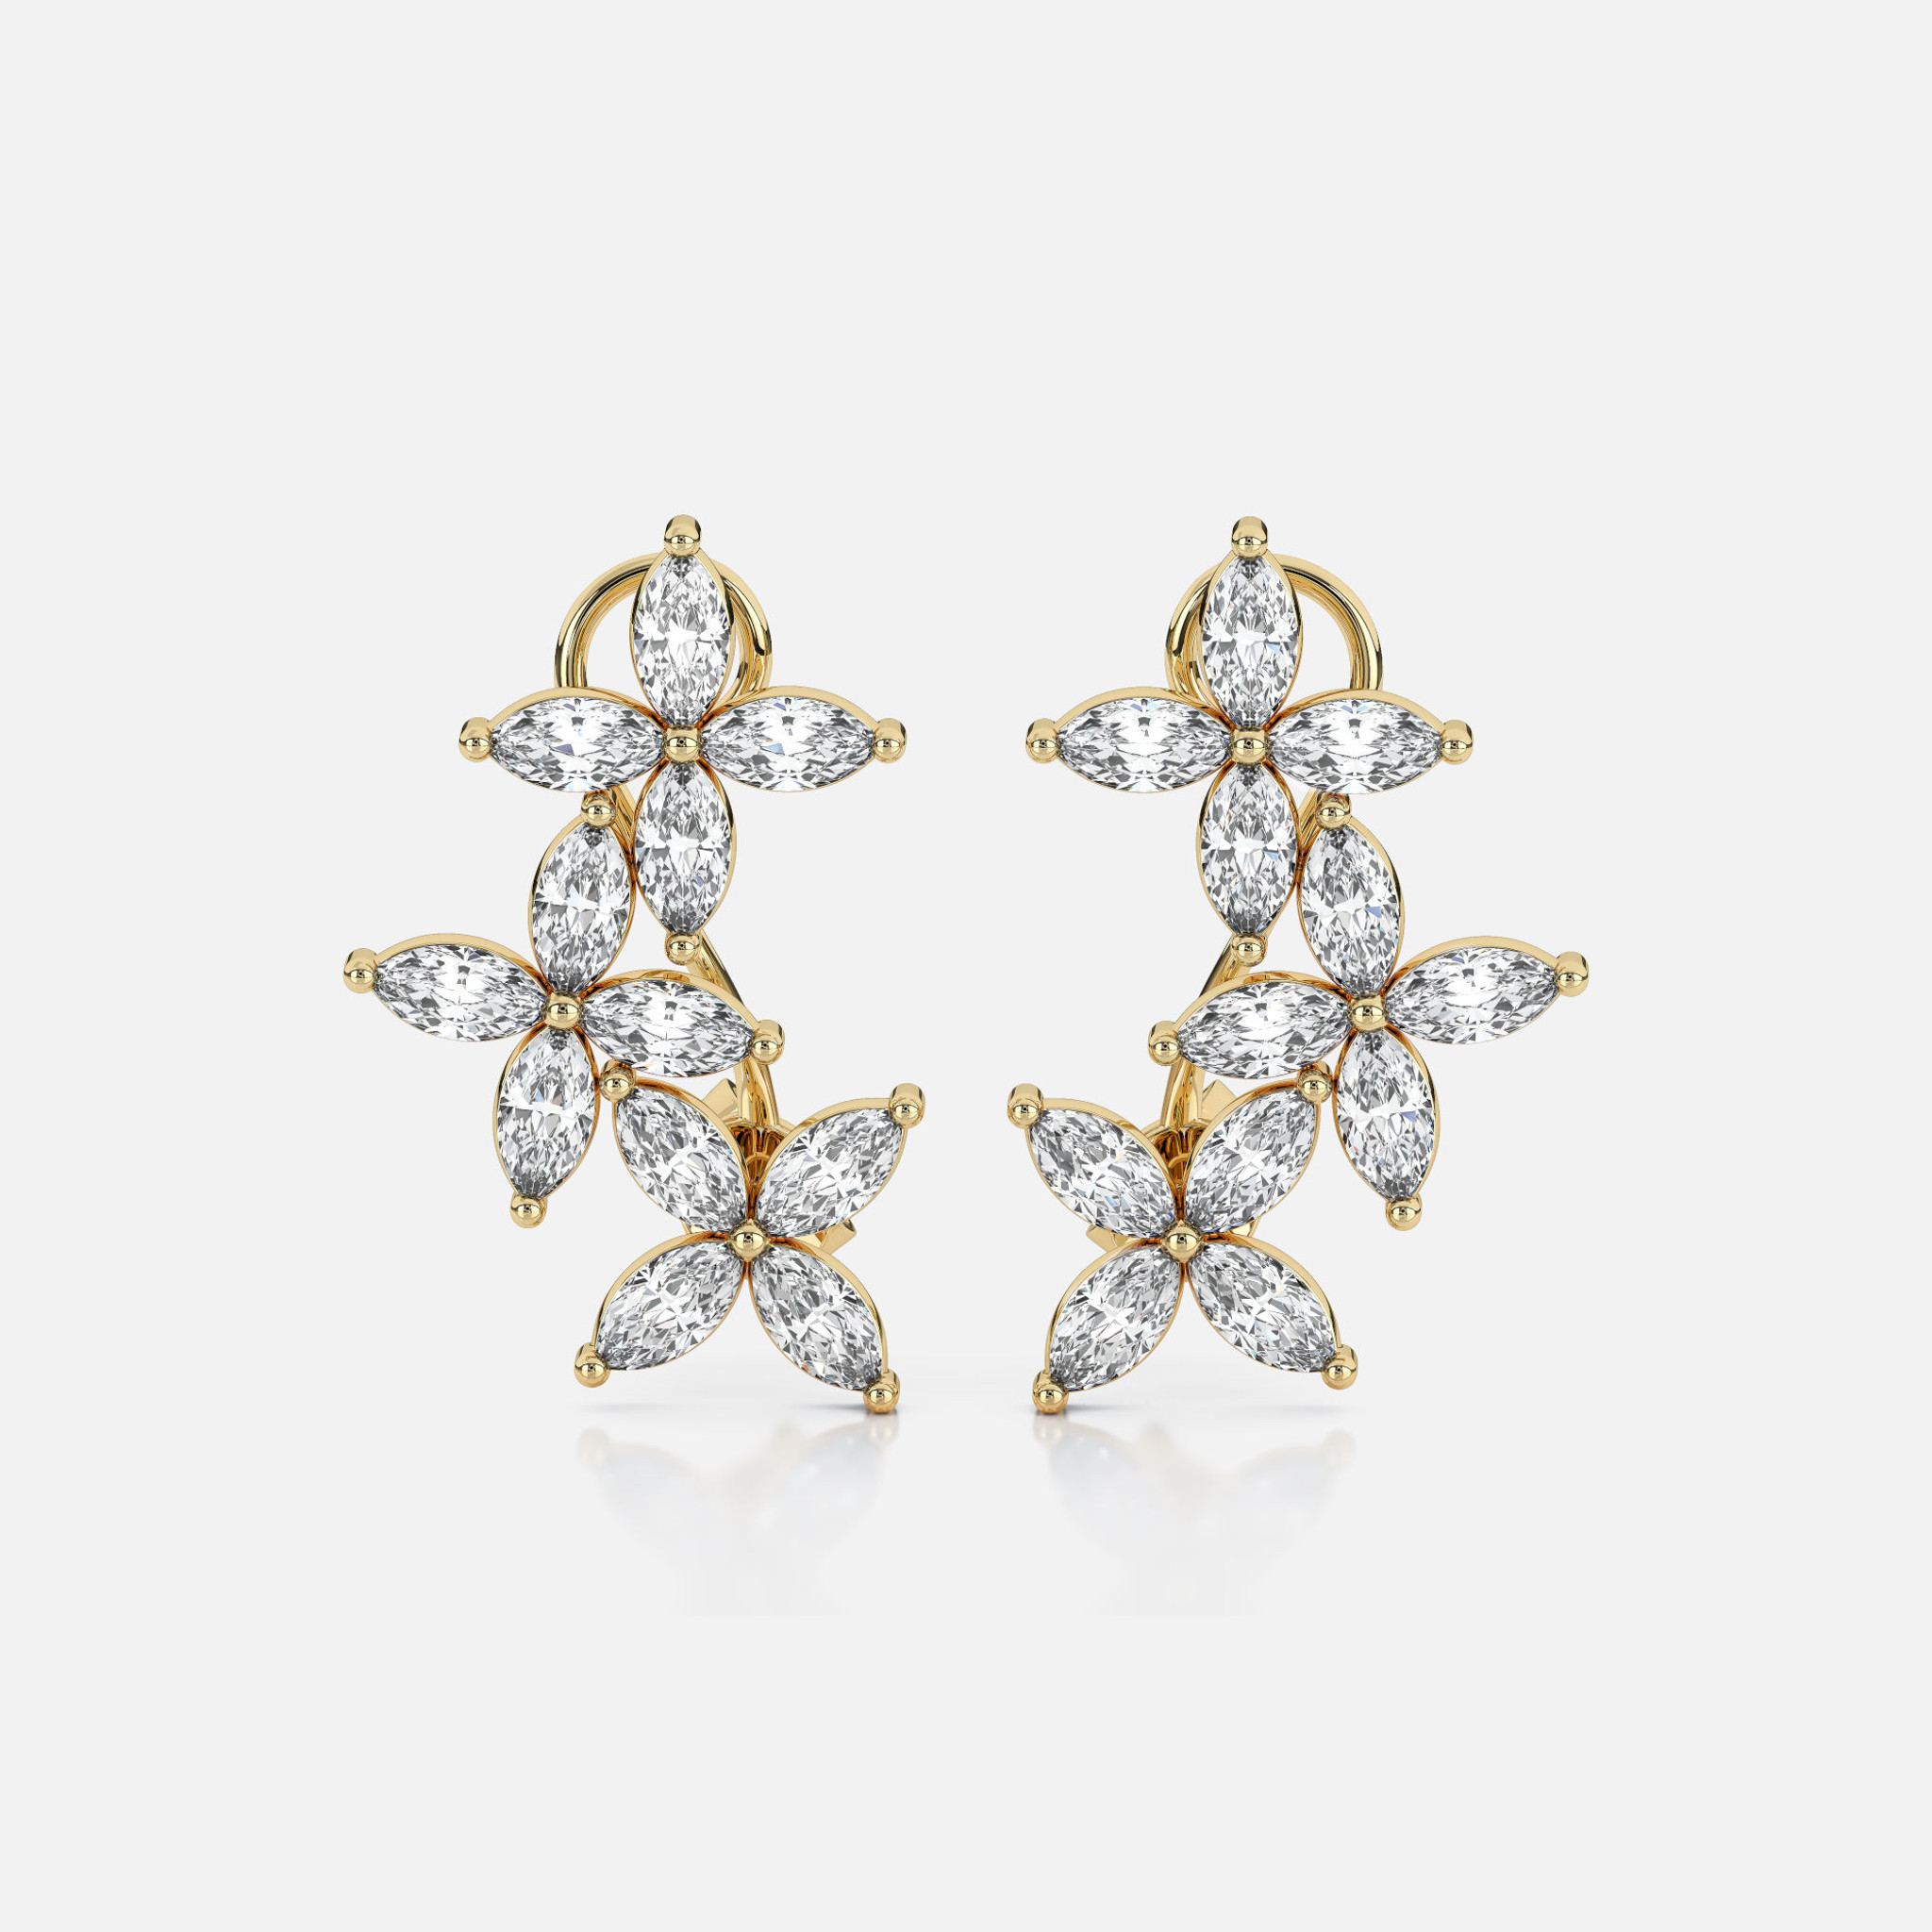 Exquisite Diamond Ear Crawler Earrings crafted from 18k gold, these earrings beautifully showcase the flocked arrangement of marquise diamonds.